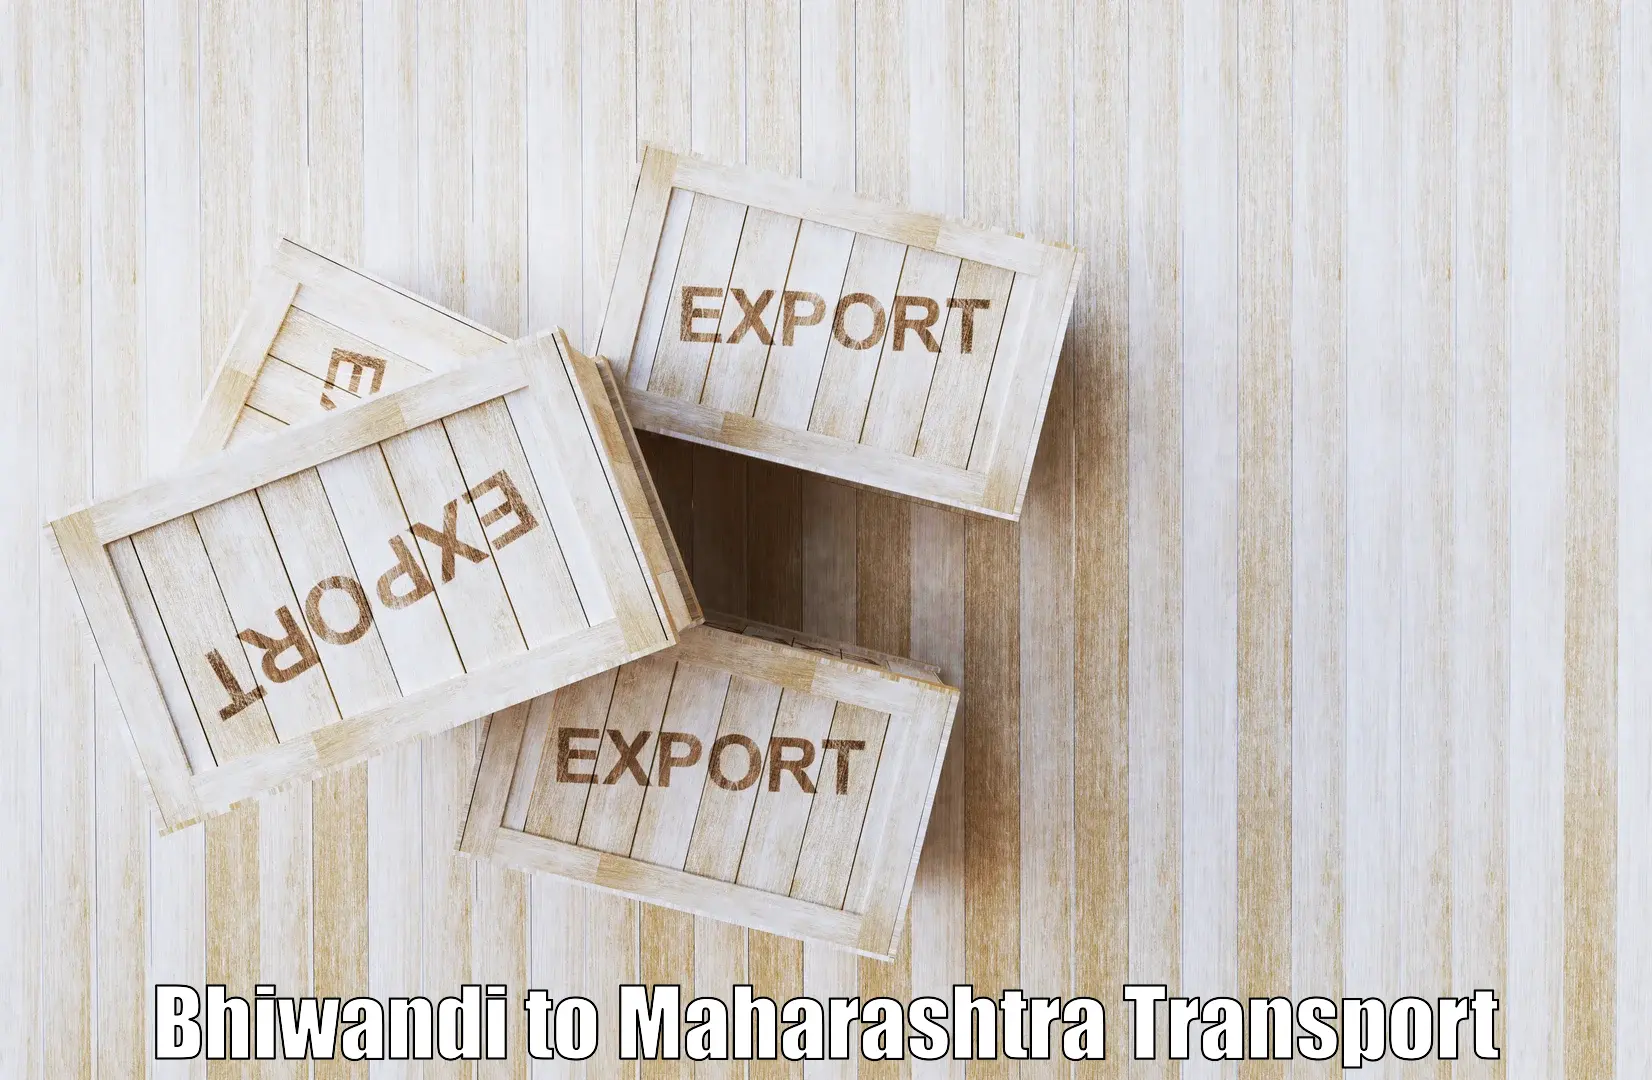 Air freight transport services Bhiwandi to Chandrapur